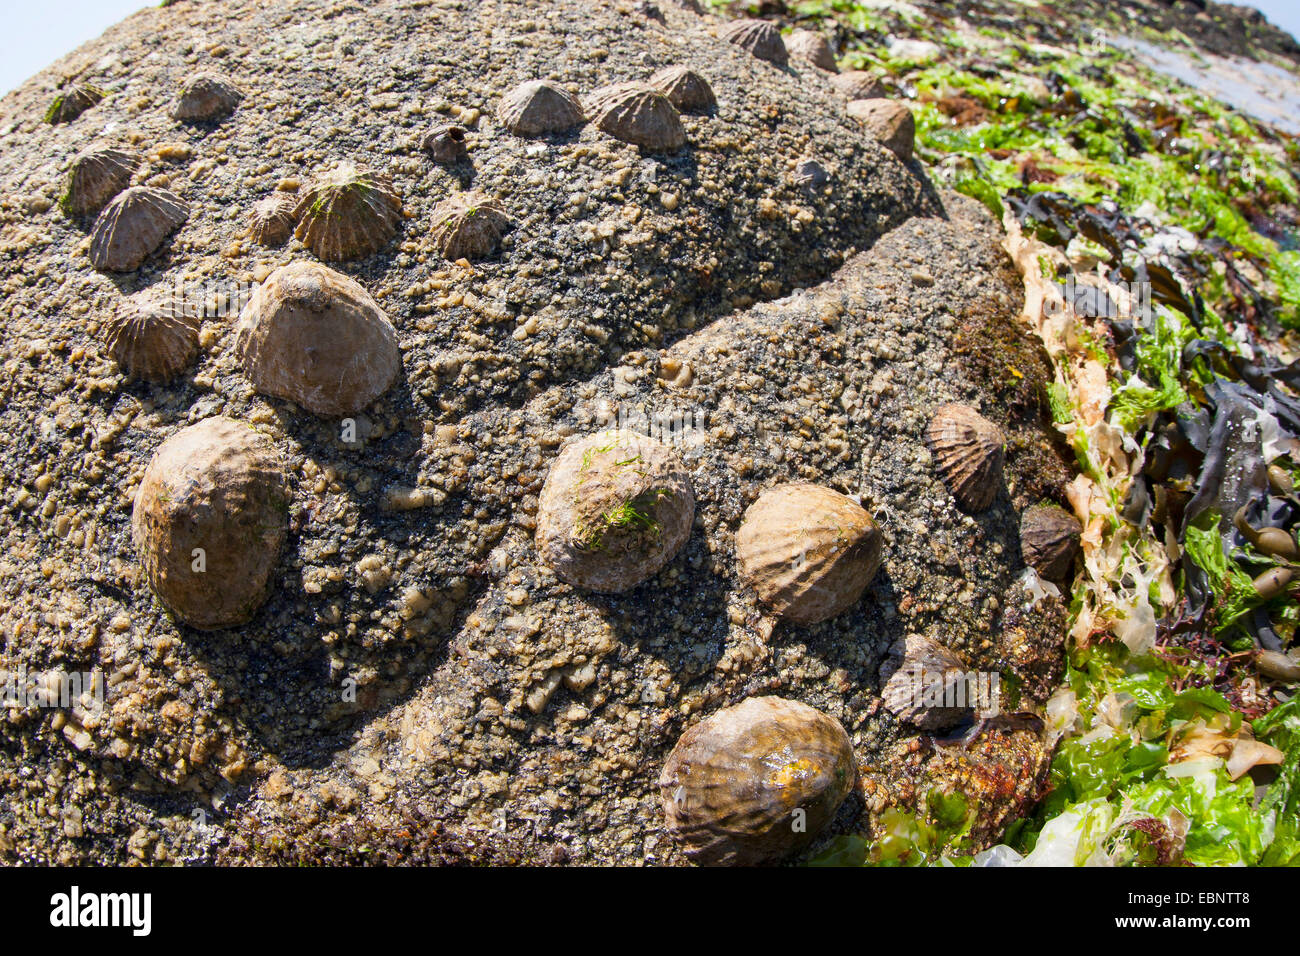 Common limpet, Common European limpet (Patella vulgata), limpets at ebb-tide on a rock, Germany Stock Photo